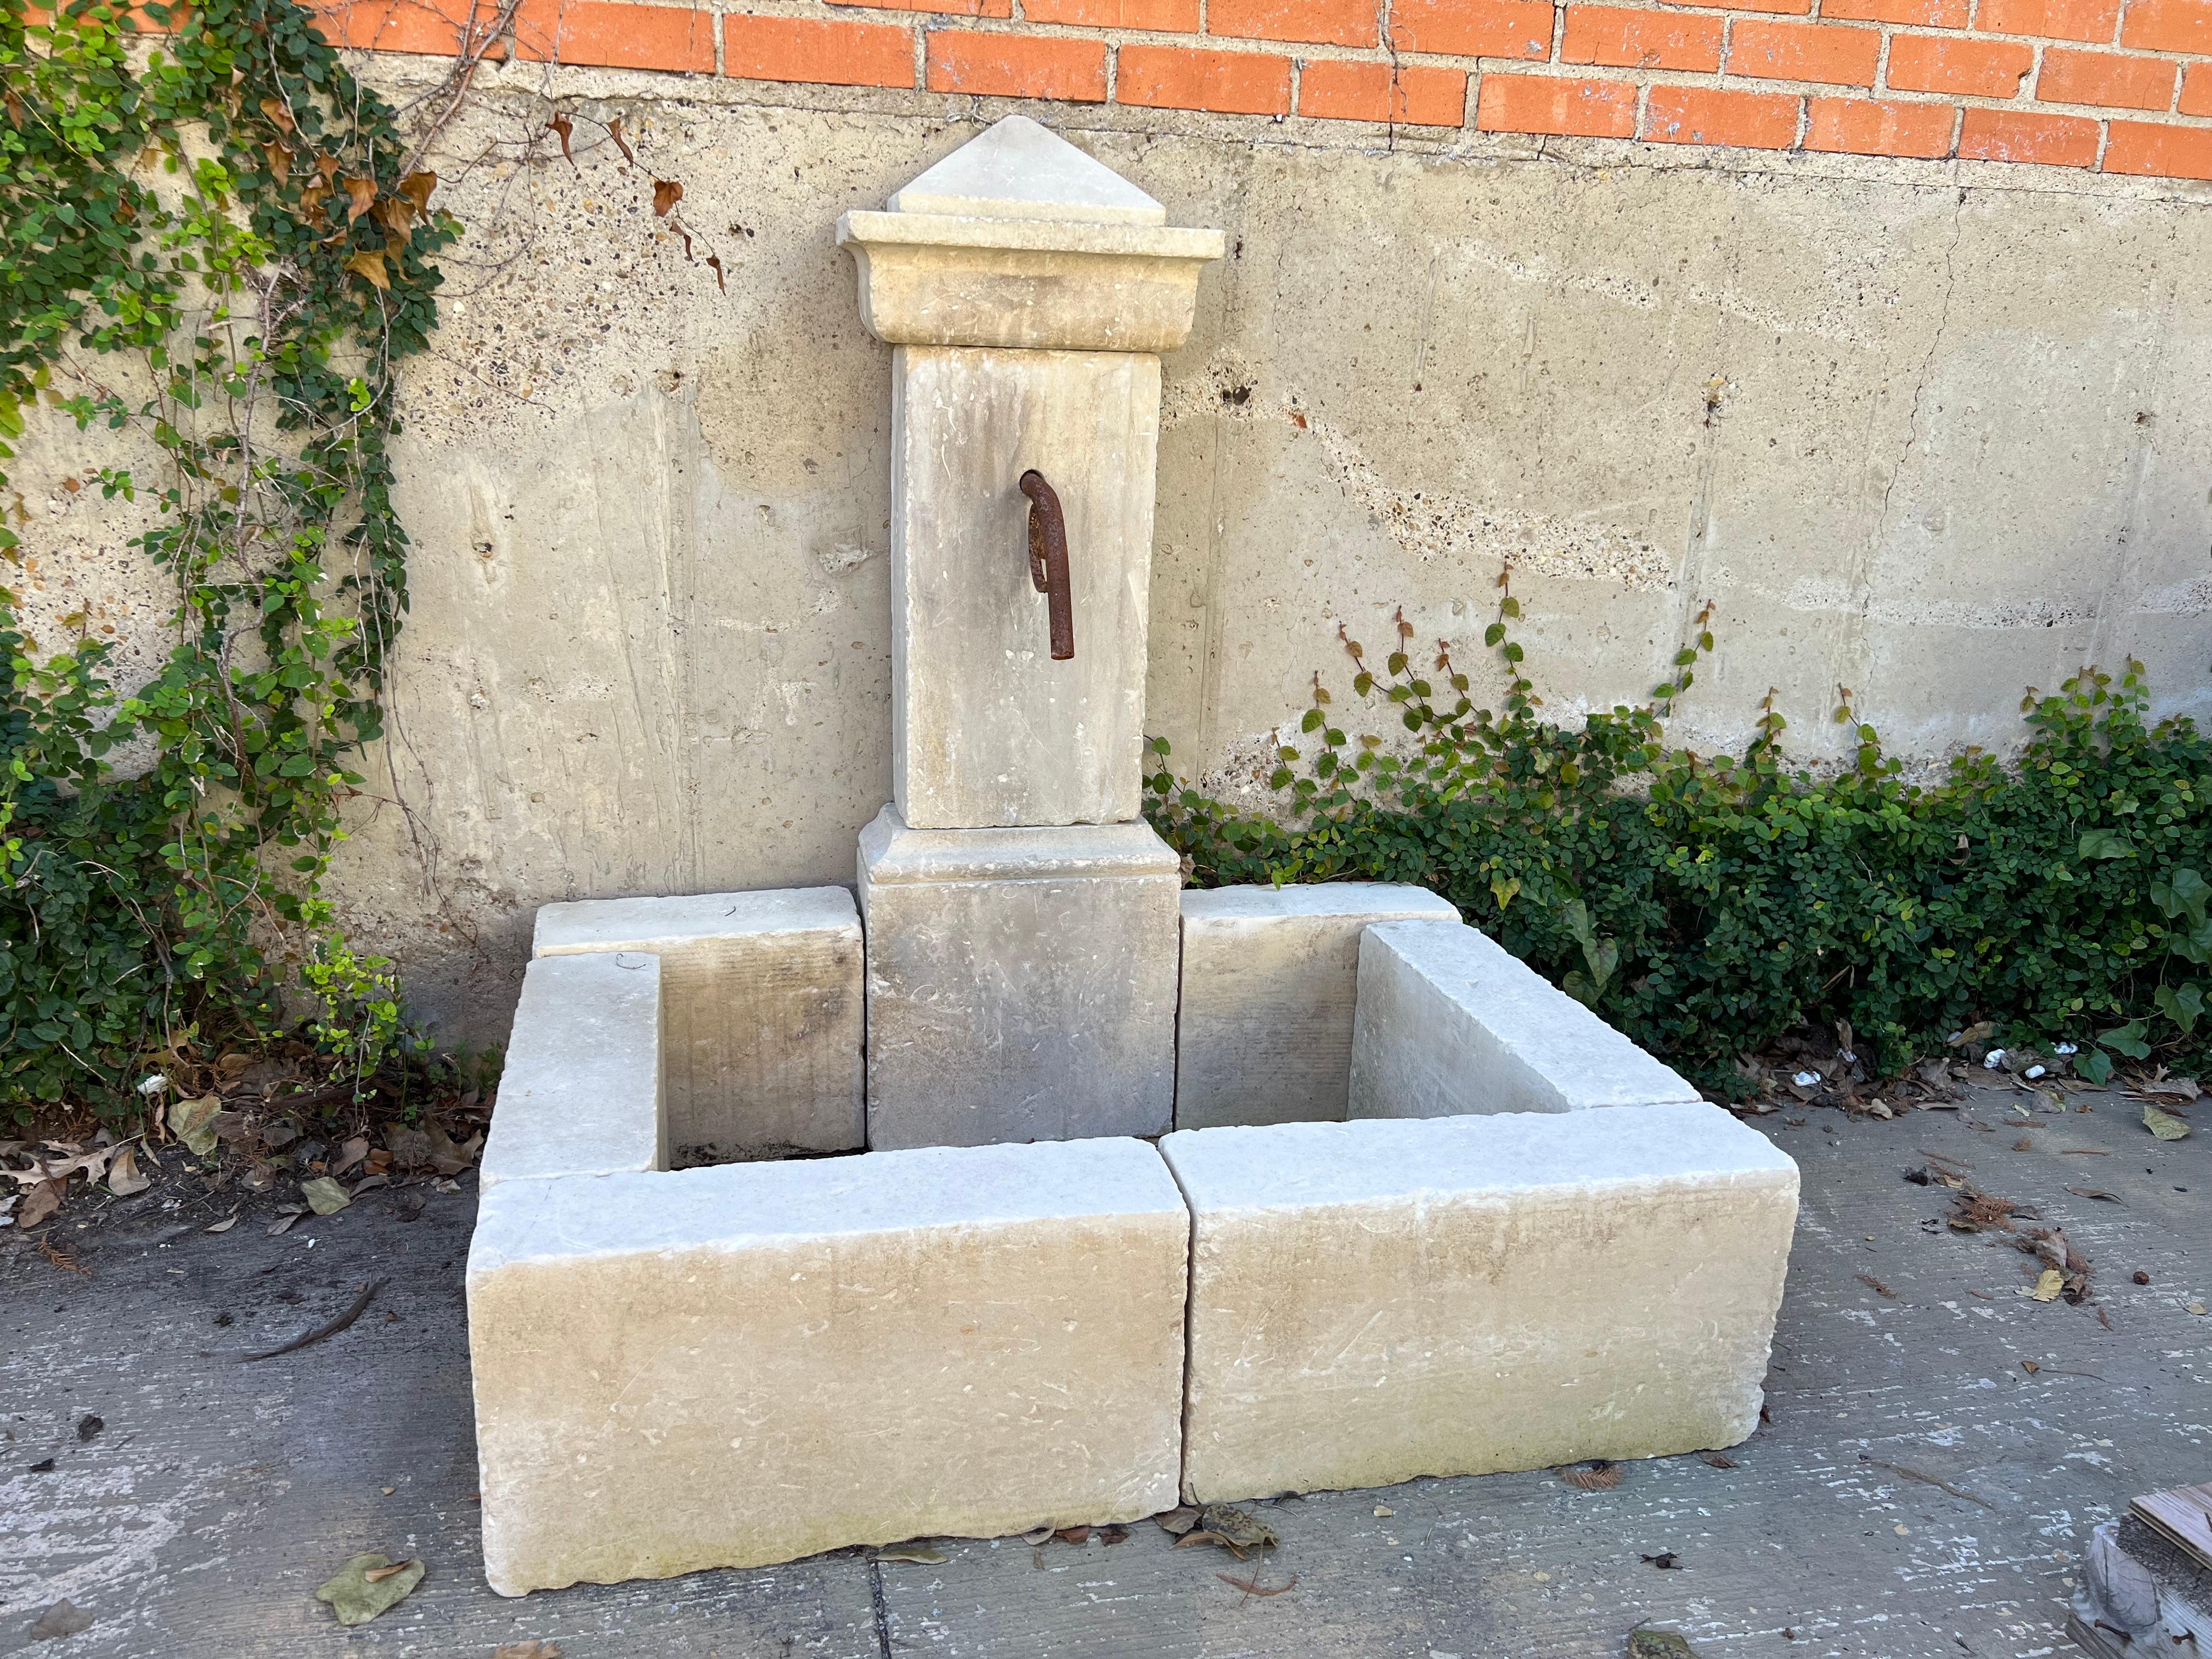 This hand-carved, single-pillar wall fountain consists of 10 pieces of southern Italian limestone. The fountain is topped by an angular pyramid finial that rests above an entablature with a deep cavetto cornice. An elaborately scrolled iron spout